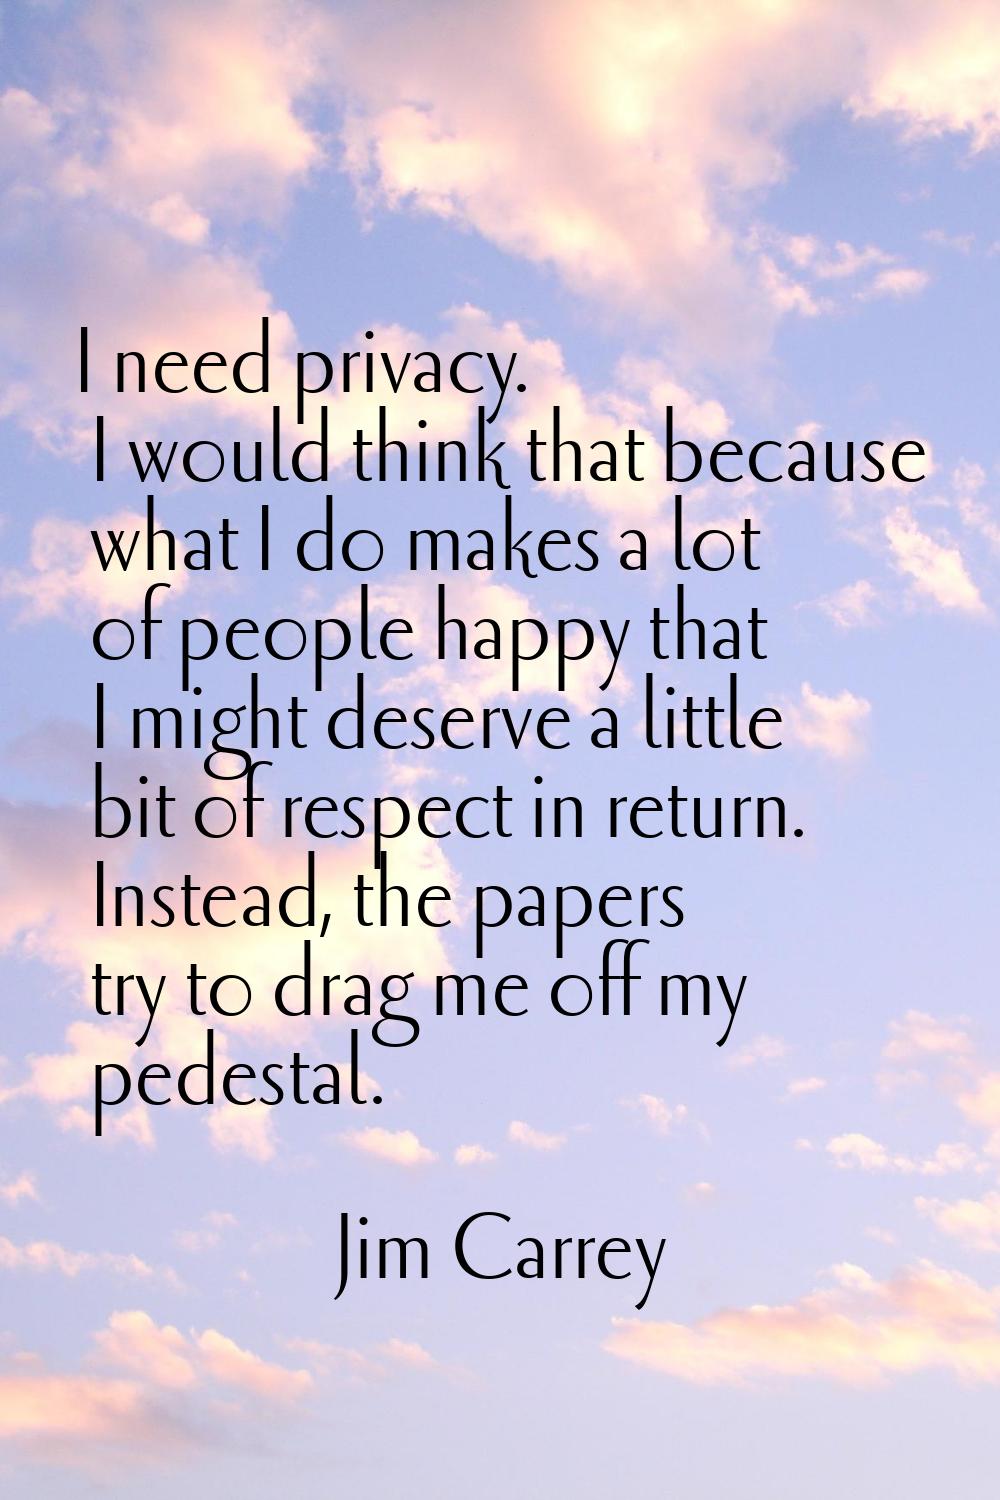 I need privacy. I would think that because what I do makes a lot of people happy that I might deser